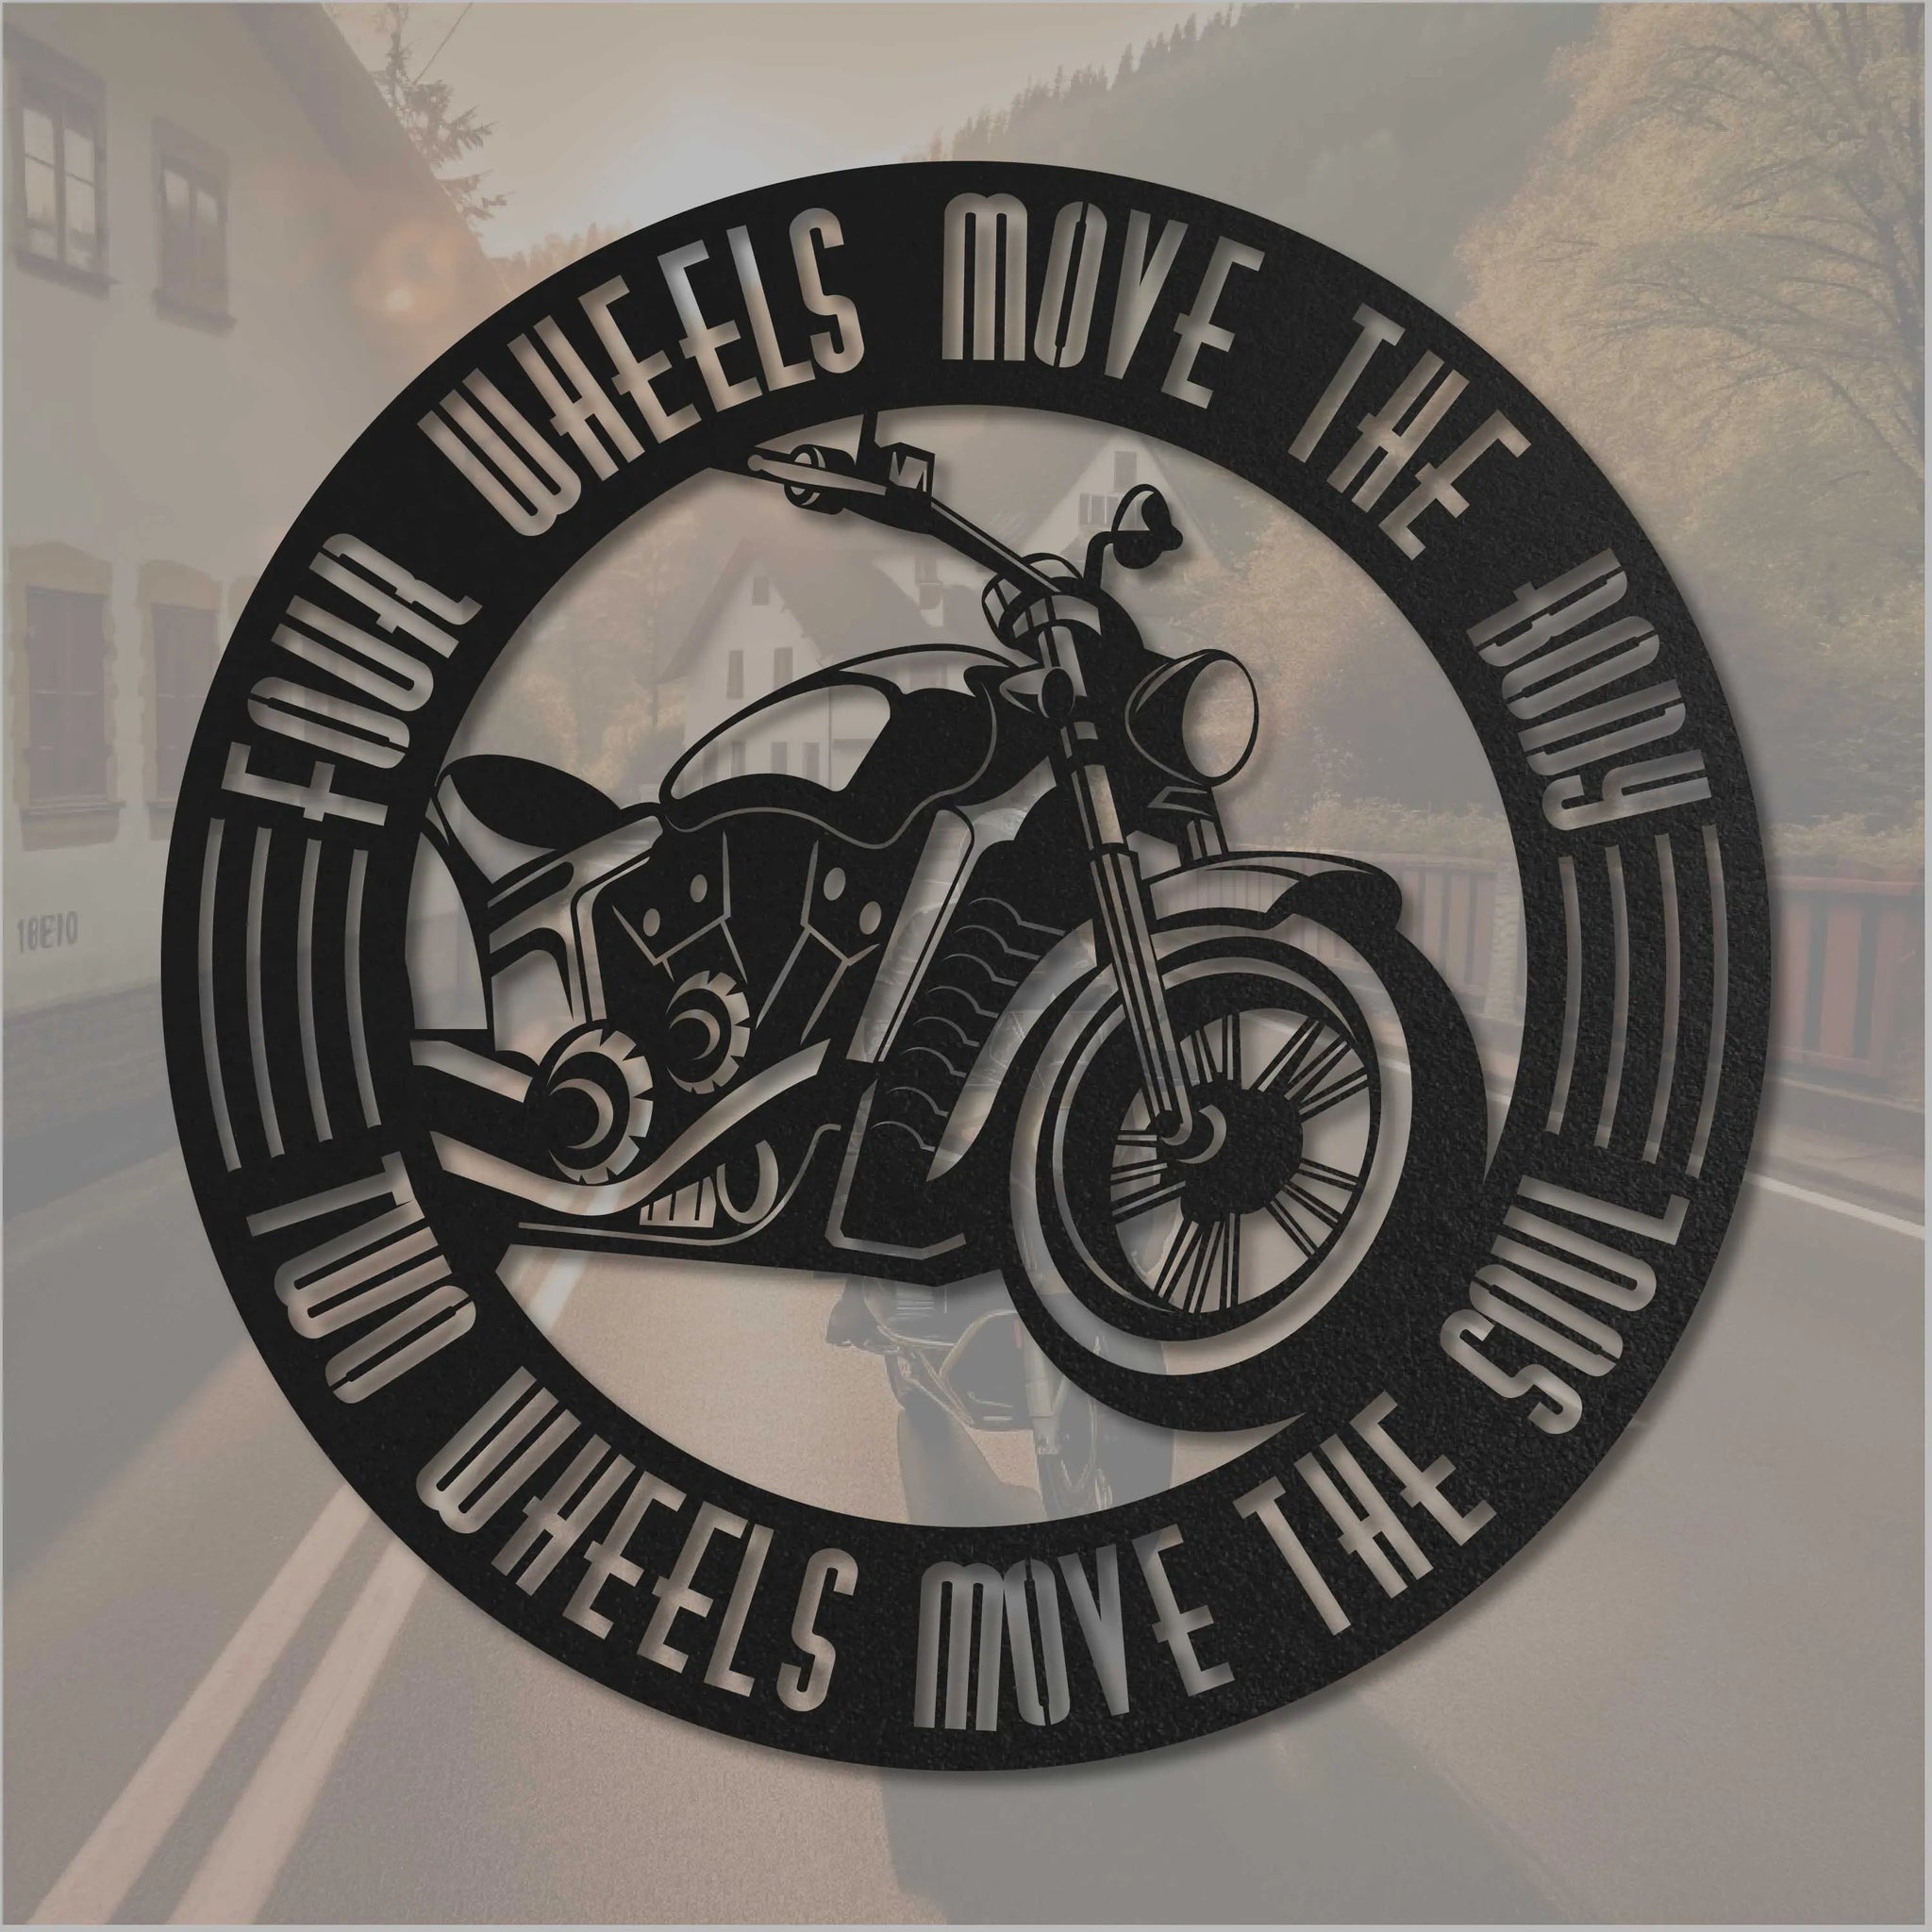 Two Wheels Move The Soul